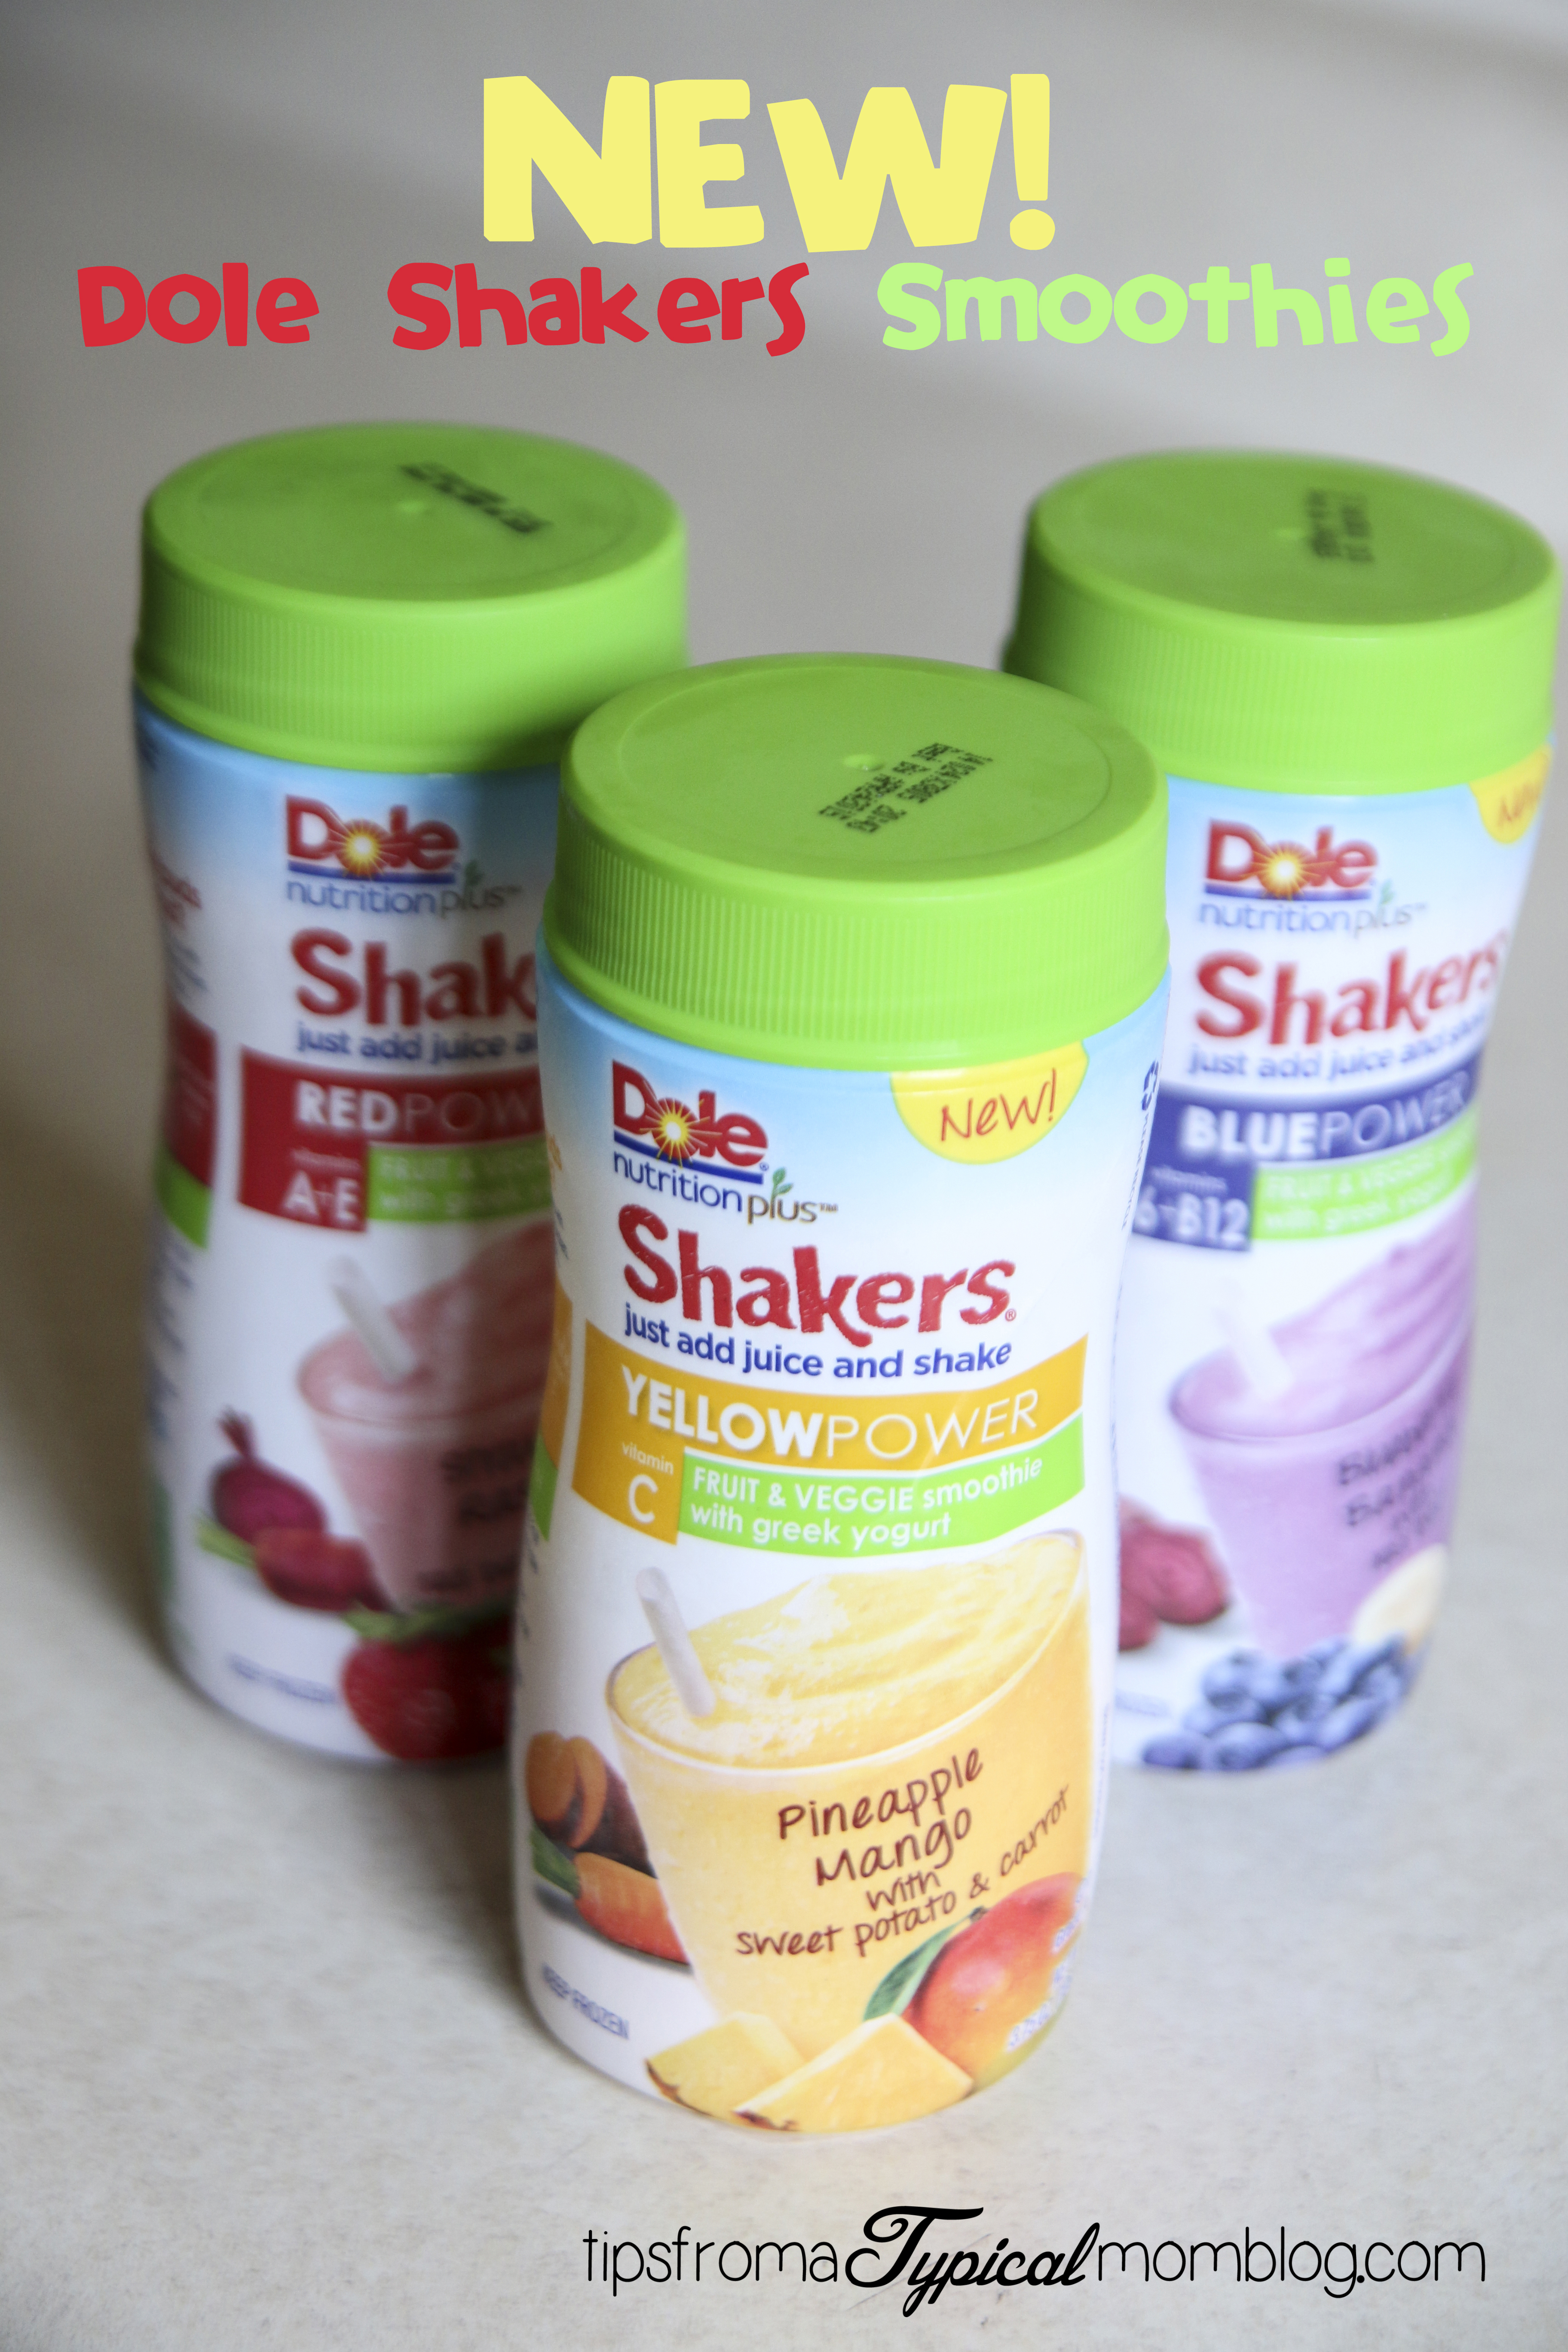 https://www.tipsfromatypicalmomblog.com/wp-content/uploads/2014/06/New-Dole-Shakers-Smoothies.jpg